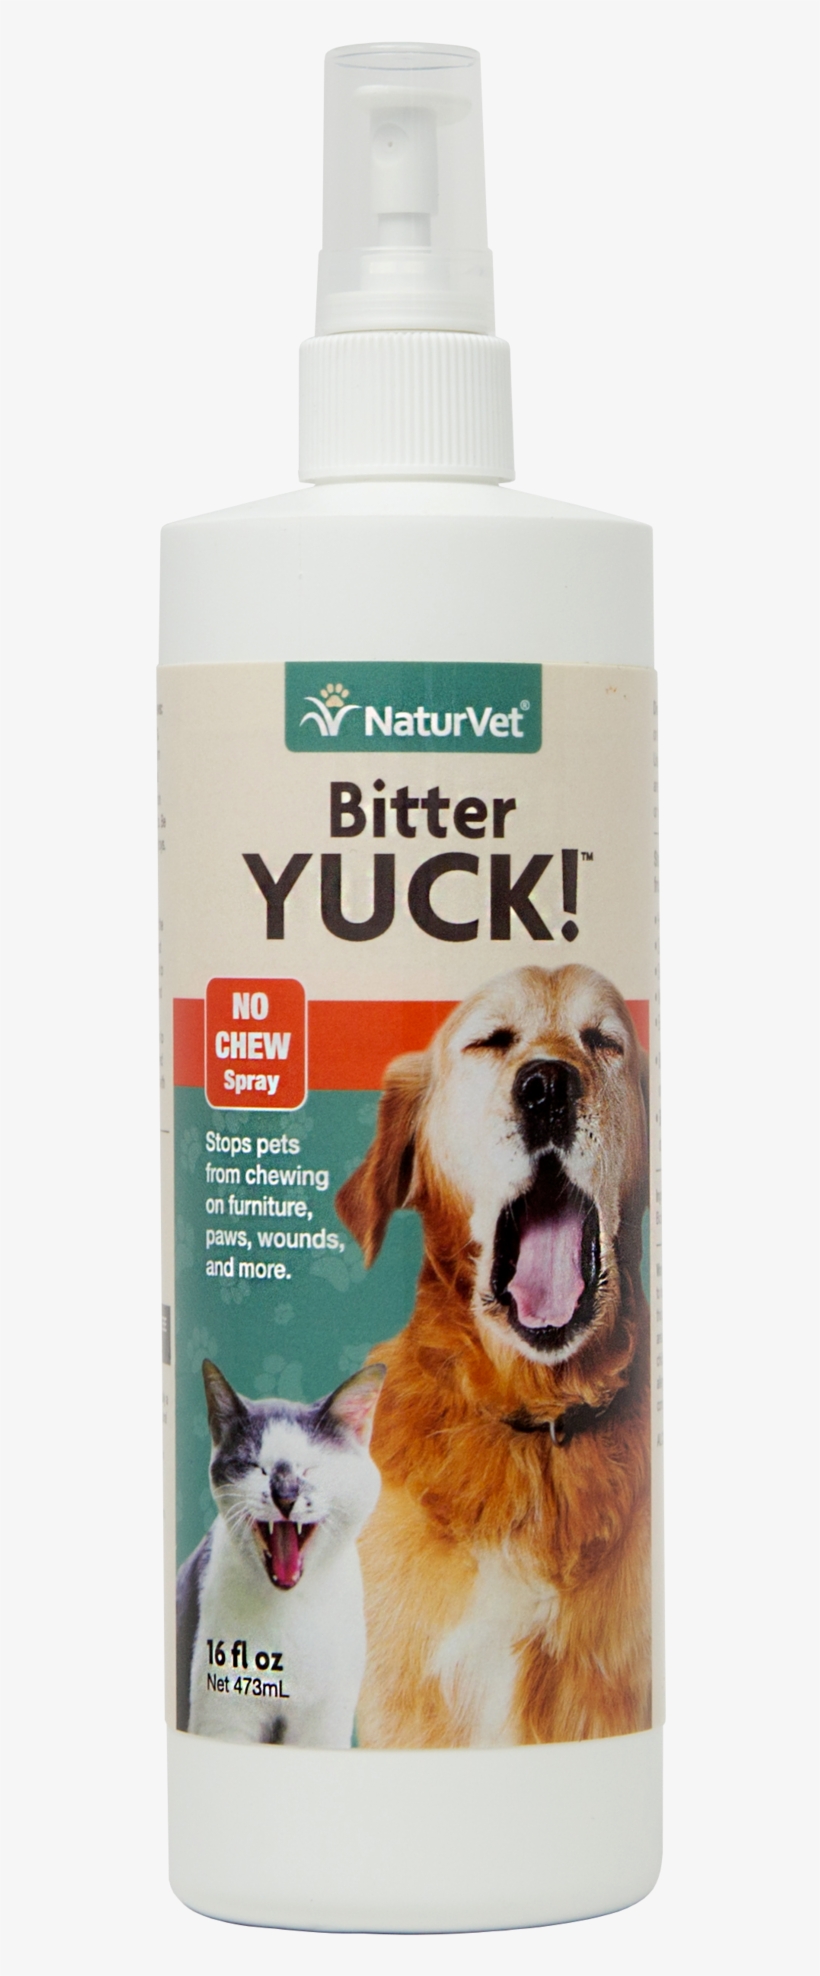 Bitter Yuck S 16oz Nv 09002 V=1456942226 - Naturvet Bitter Yuck! No Chew Spray For Dogs And Cats, transparent png #945892